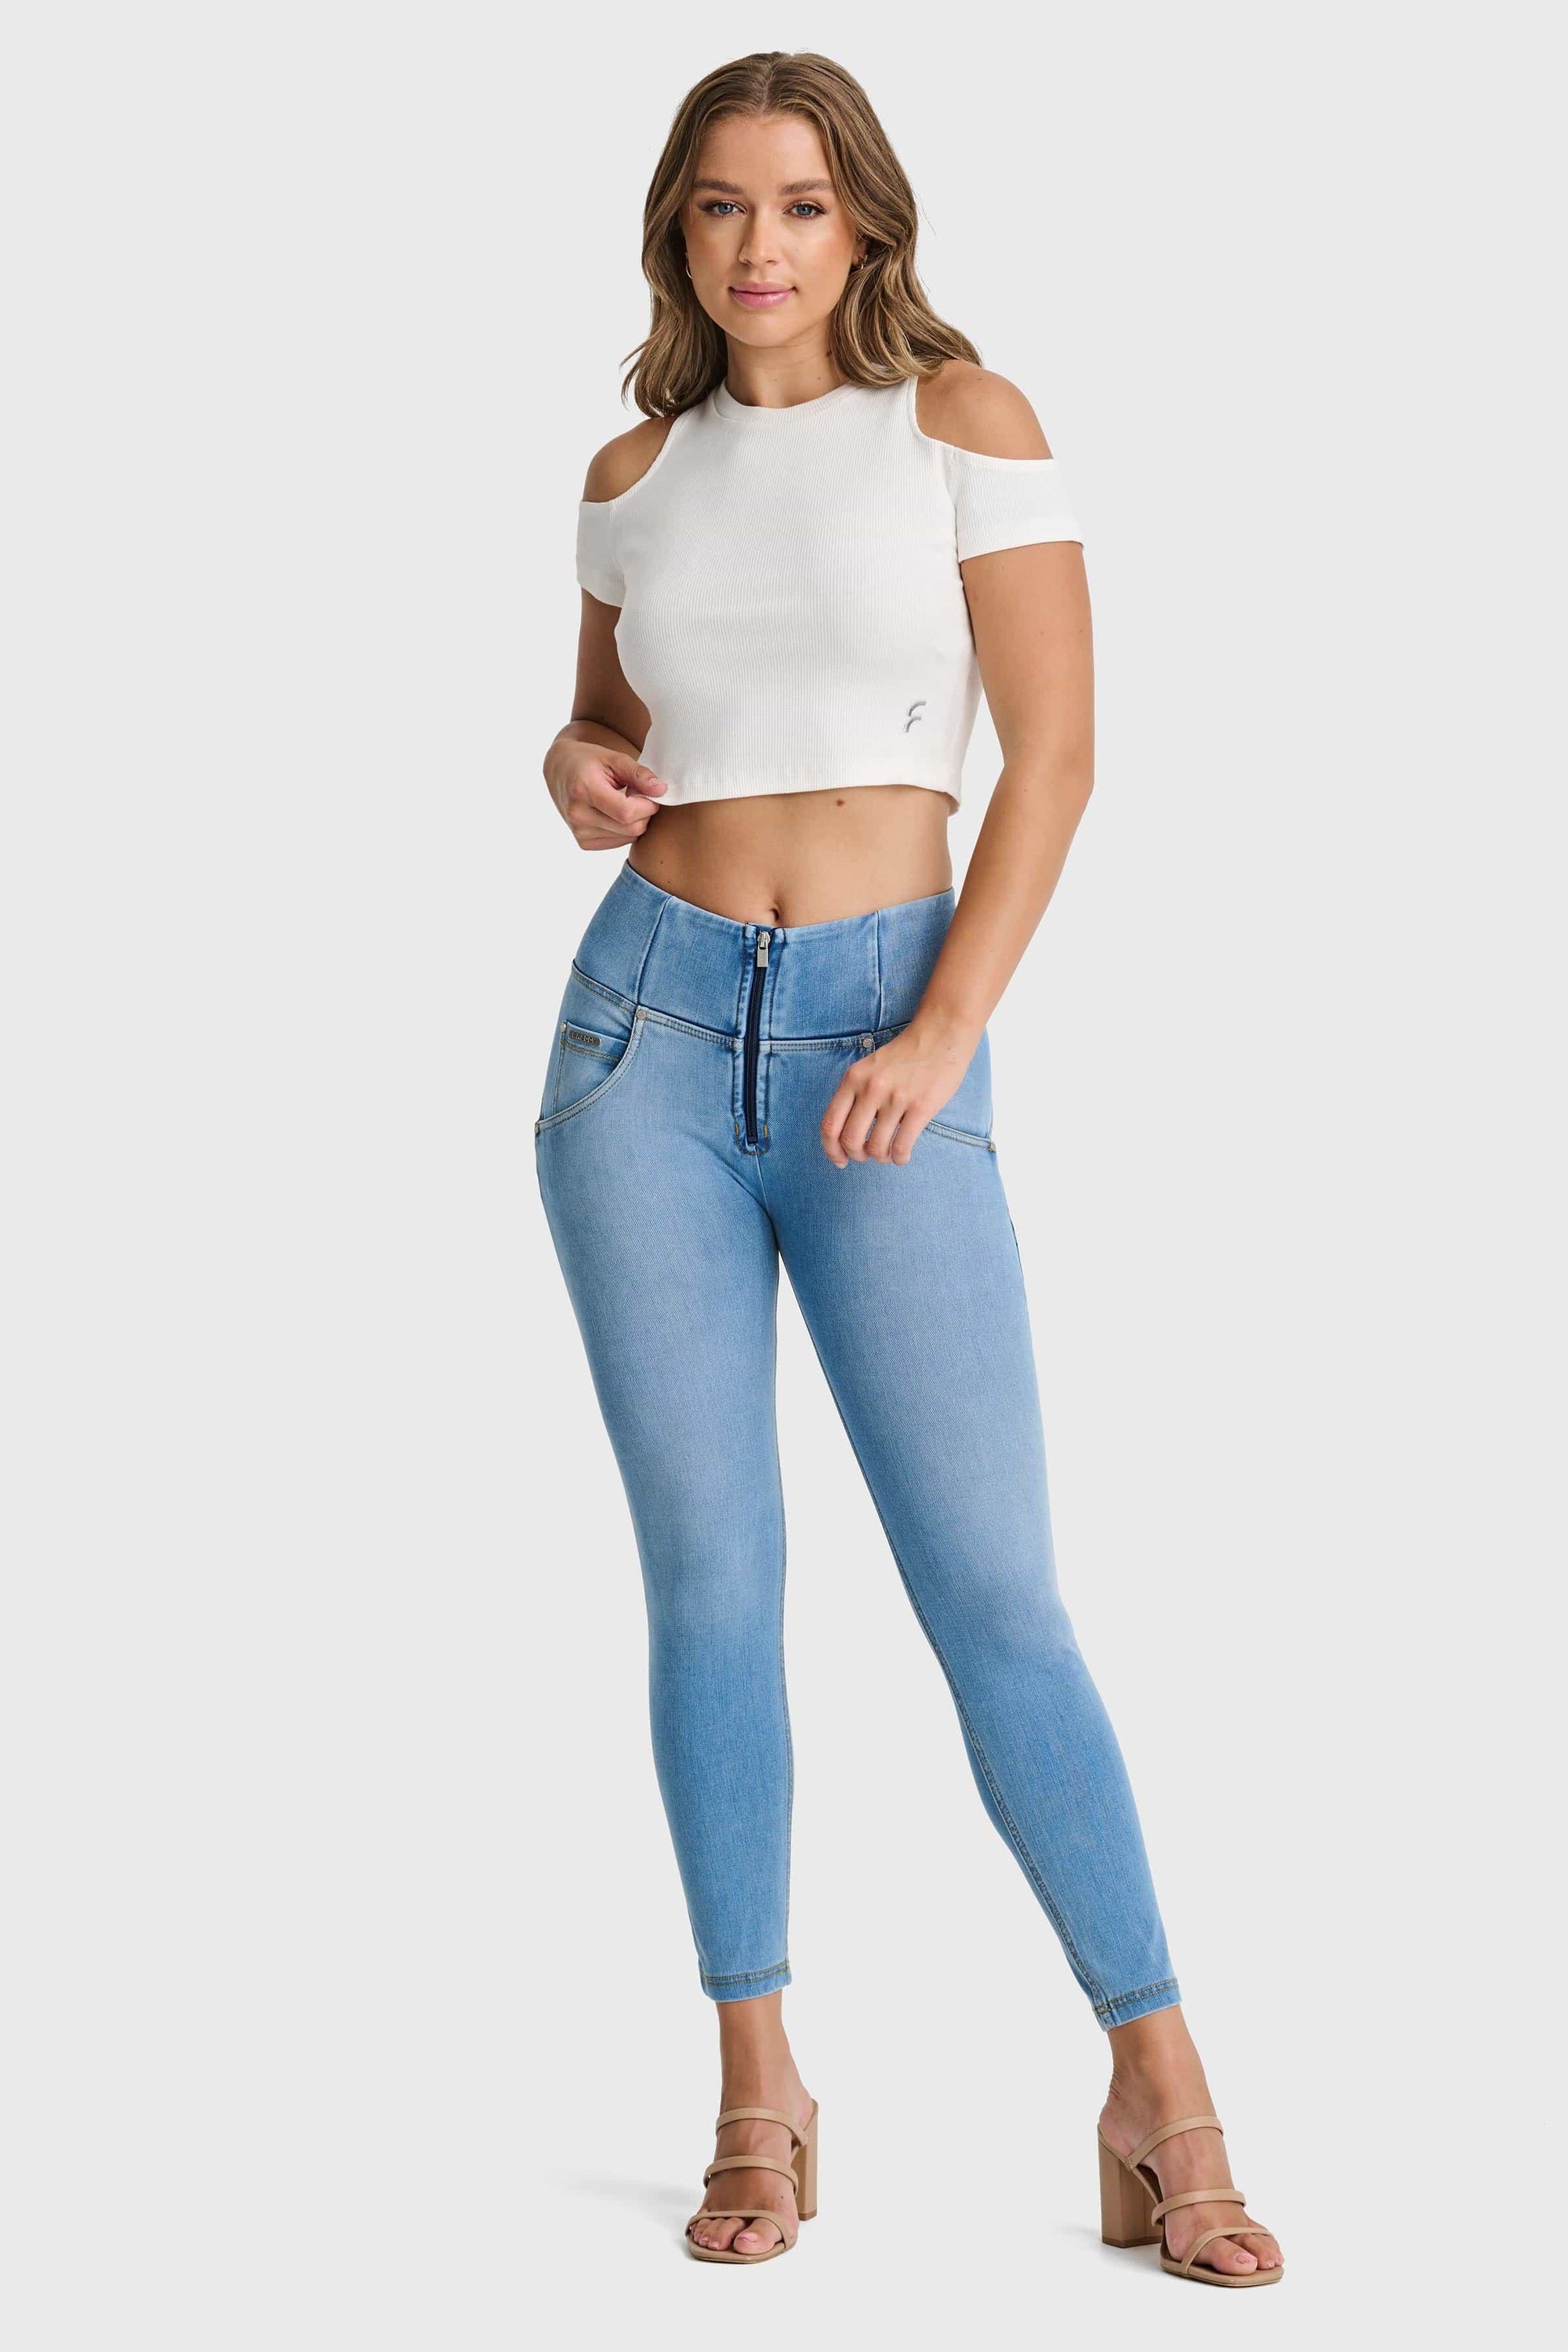 Cropped Cut Out T Shirt - White 3